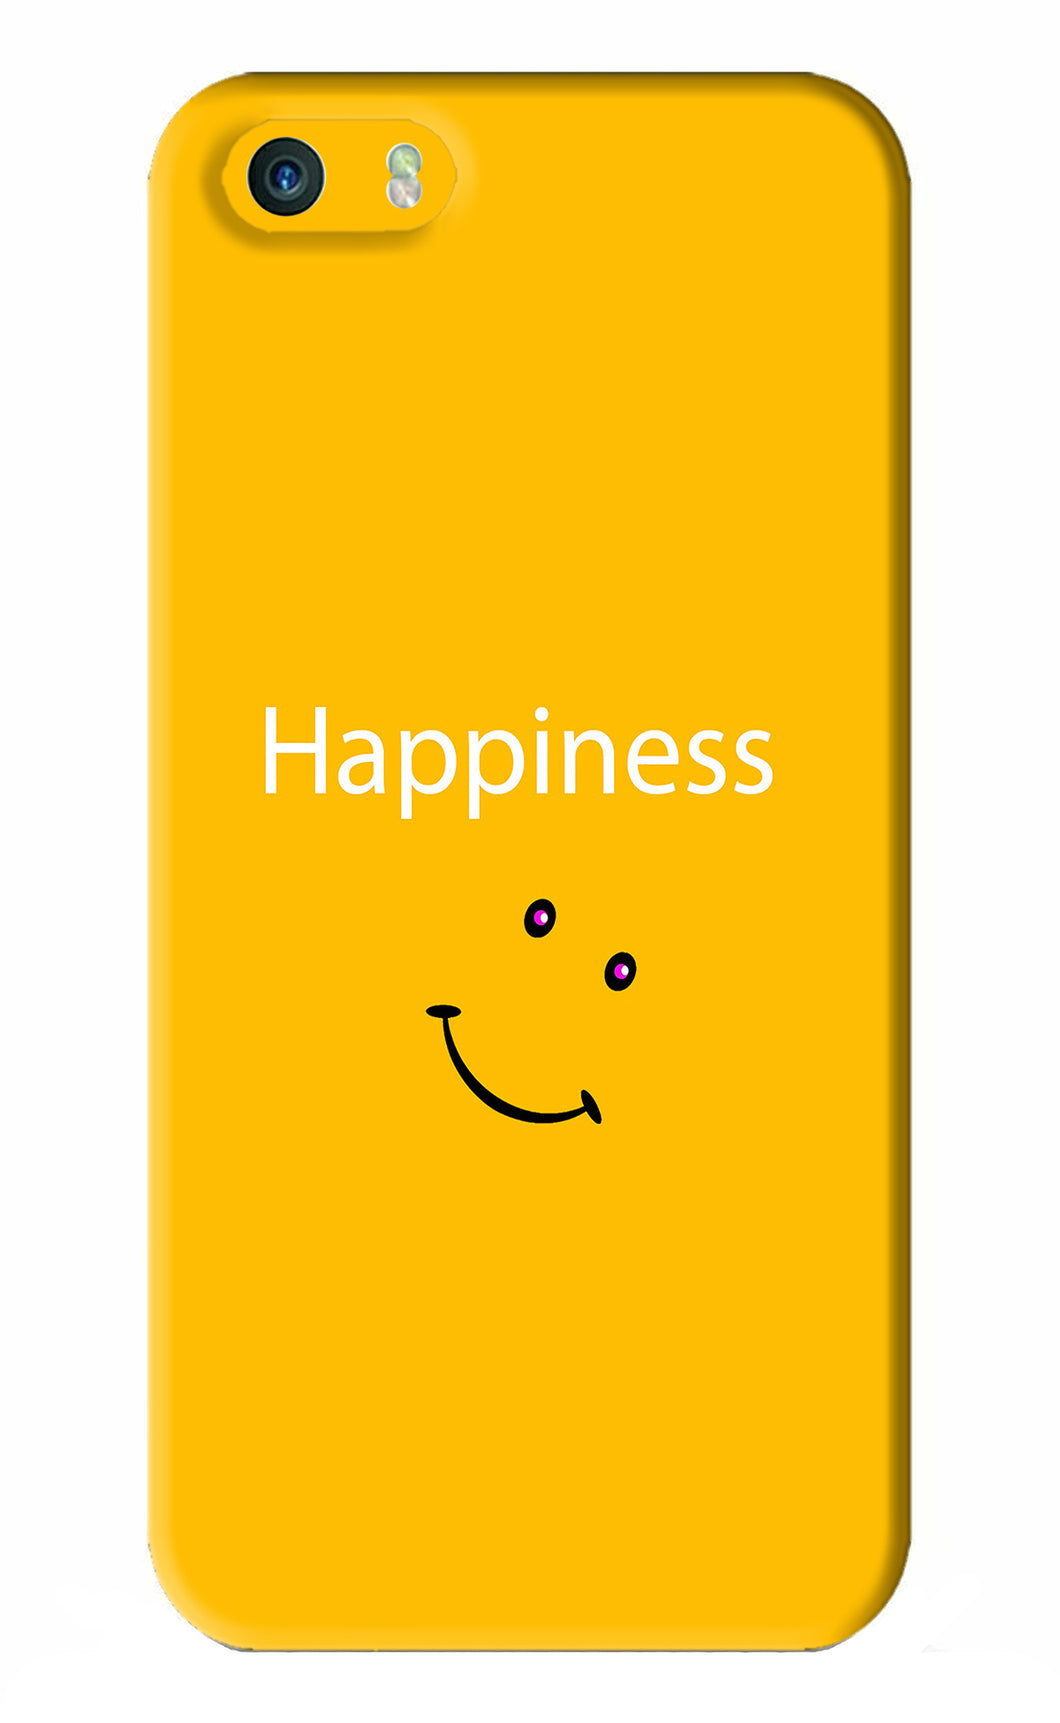 Happiness With Smiley iPhone 5S Back Skin Wrap